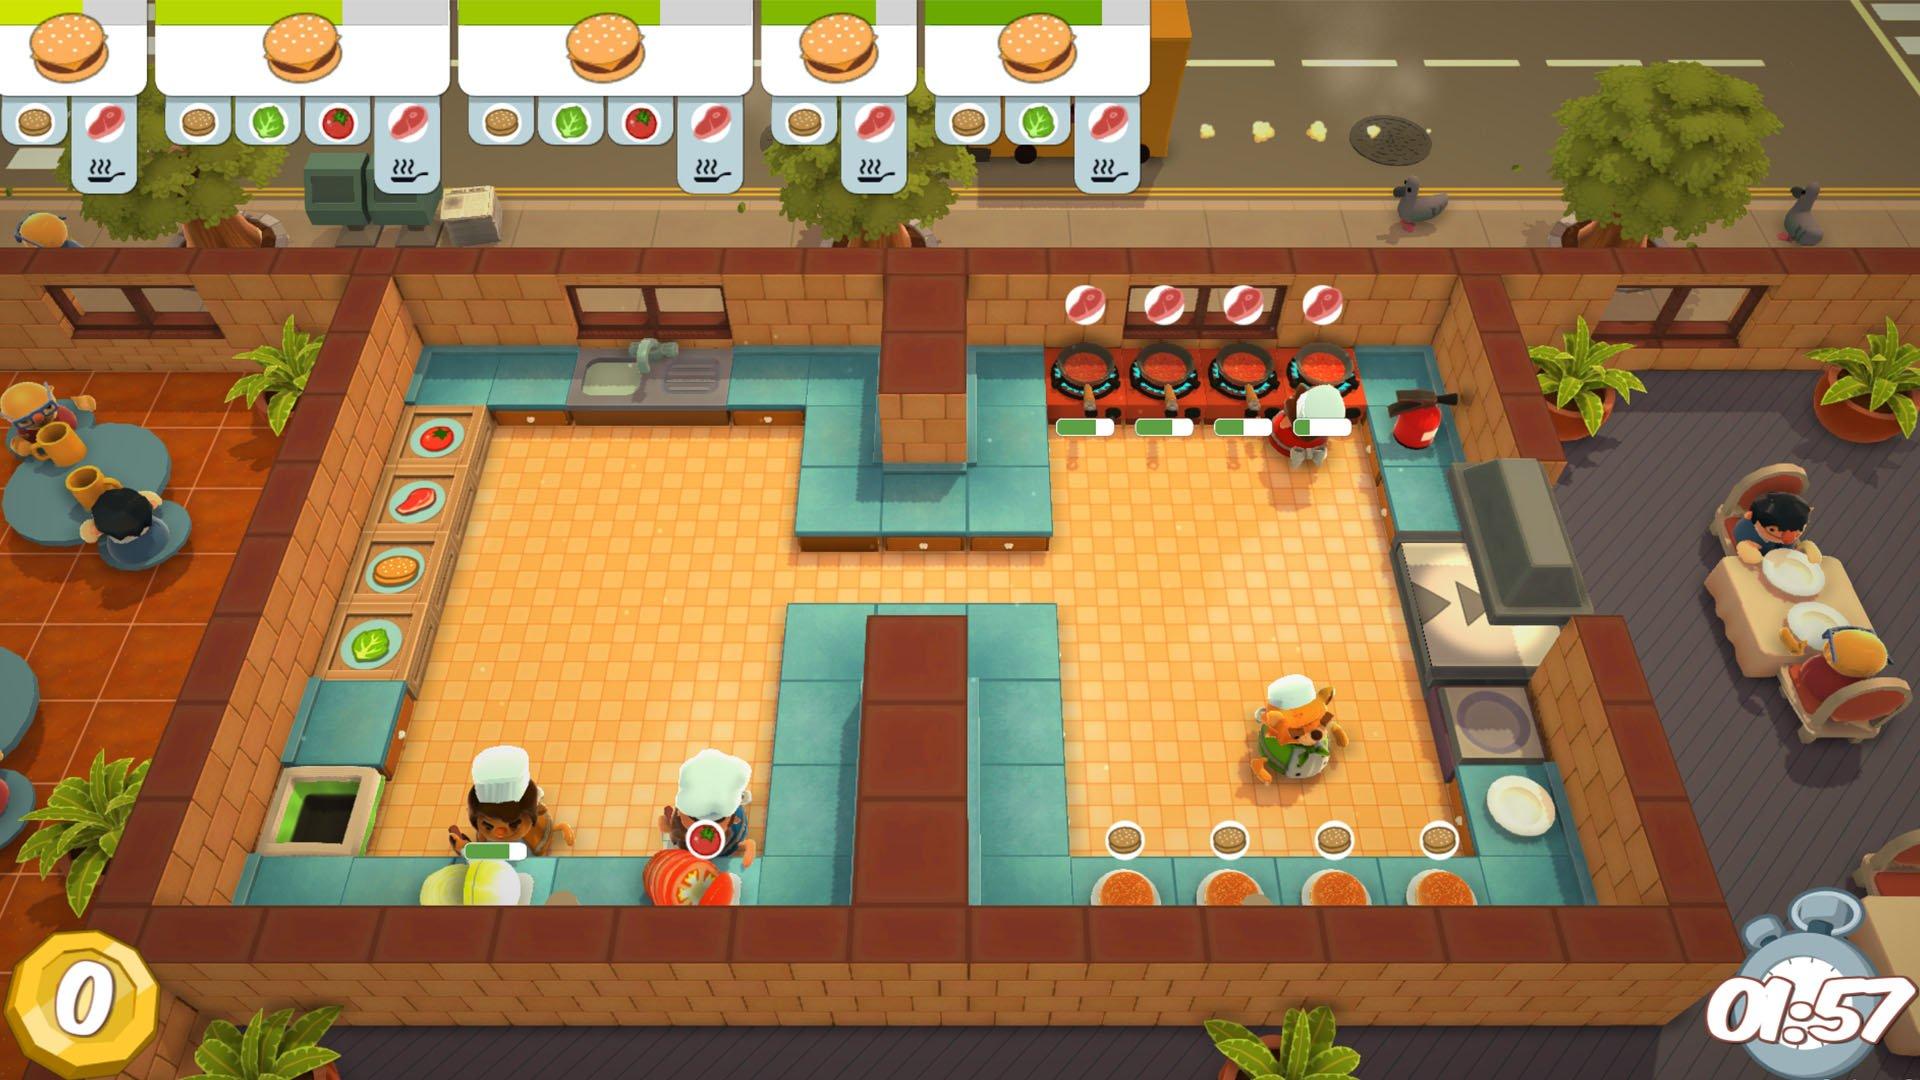 overcooked switch price